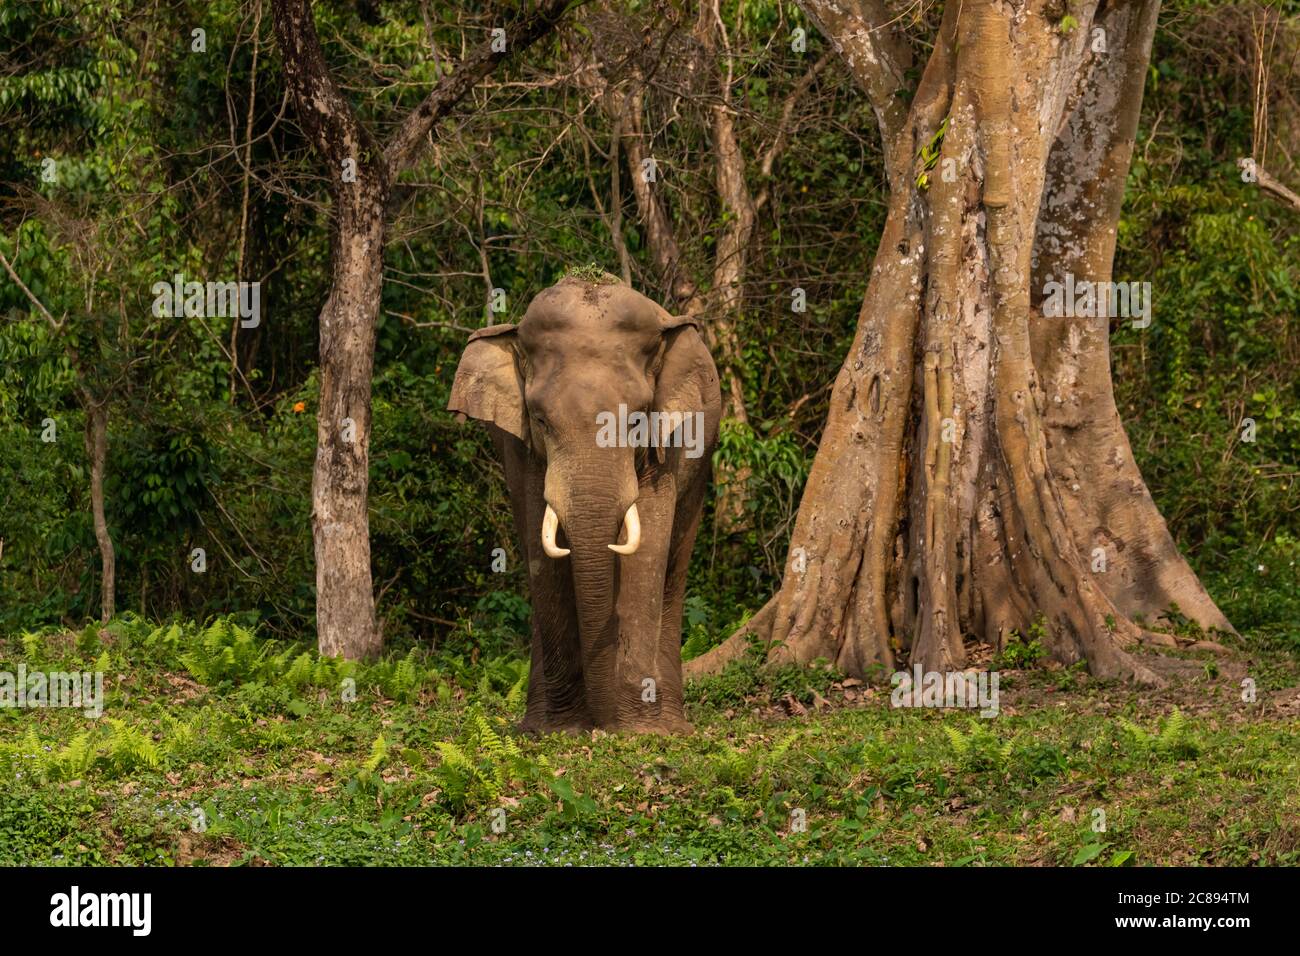 A selective focus image of a wild Asian Elephant with tusks standing at the edge of a jungle at a National park at West Bengal India Stock Photo